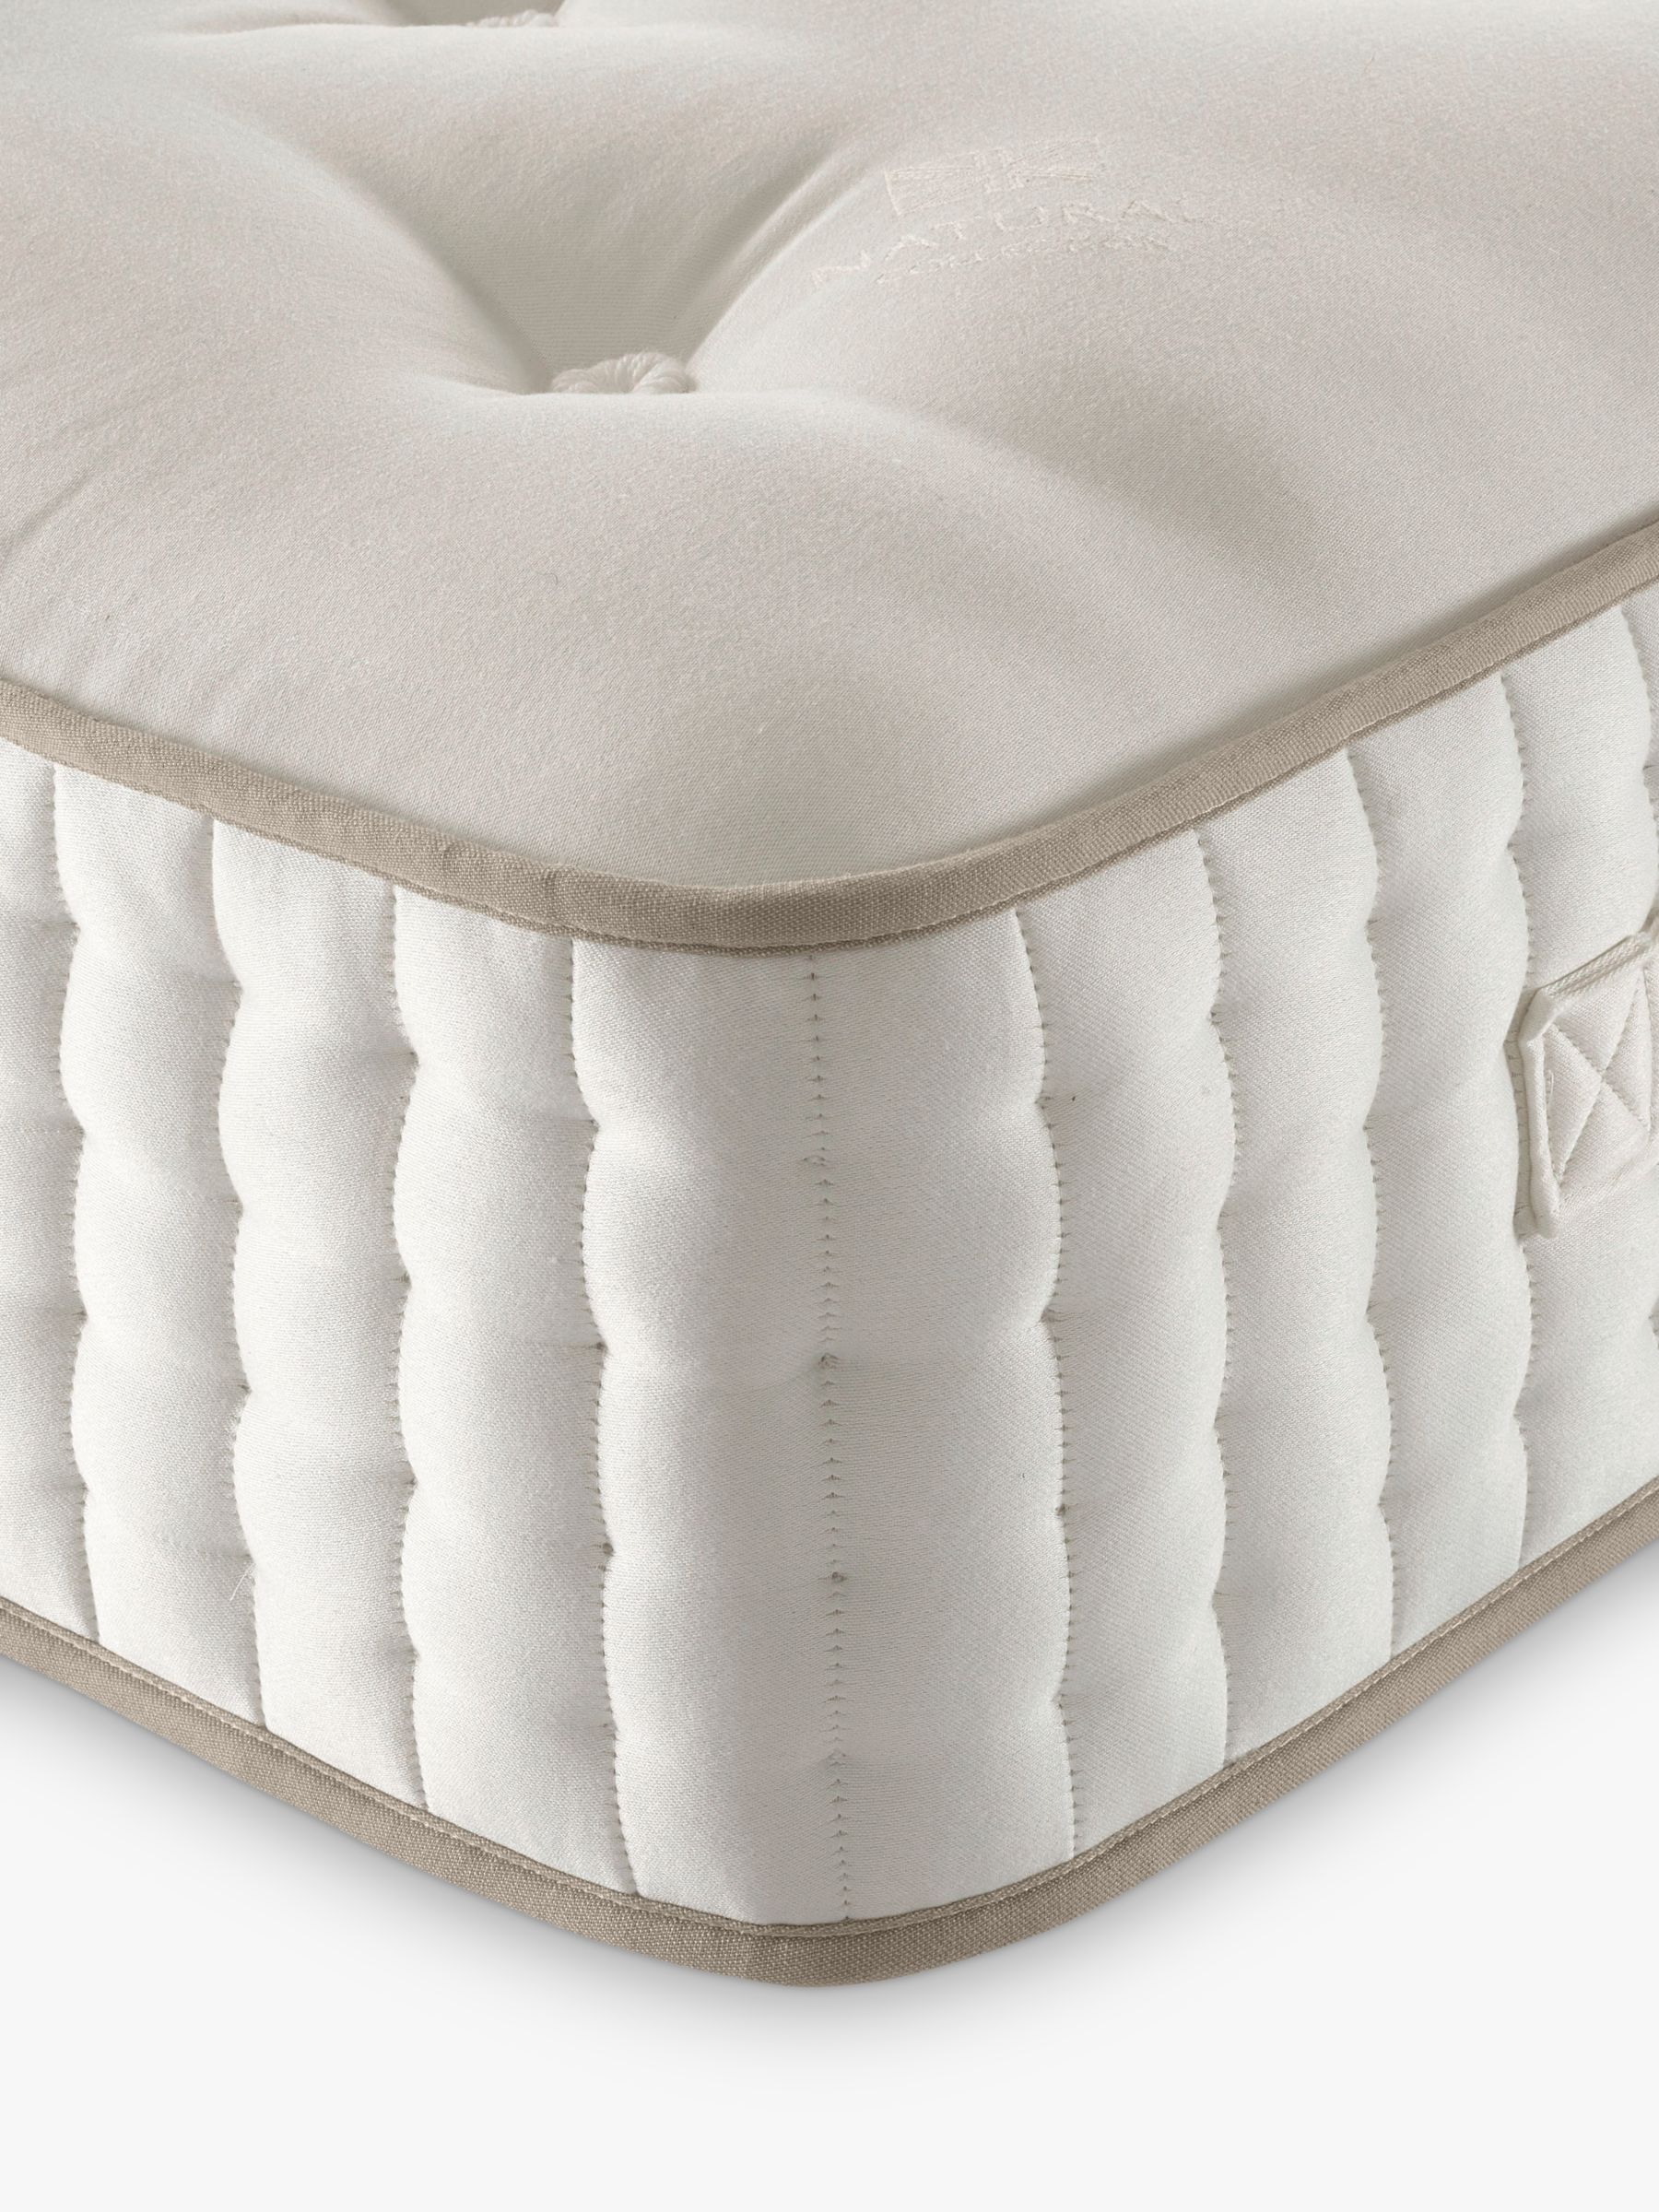 Photo of John lewis luxury natural collection cashmere 27000 king size firmer tension pocket spring zip link mattress